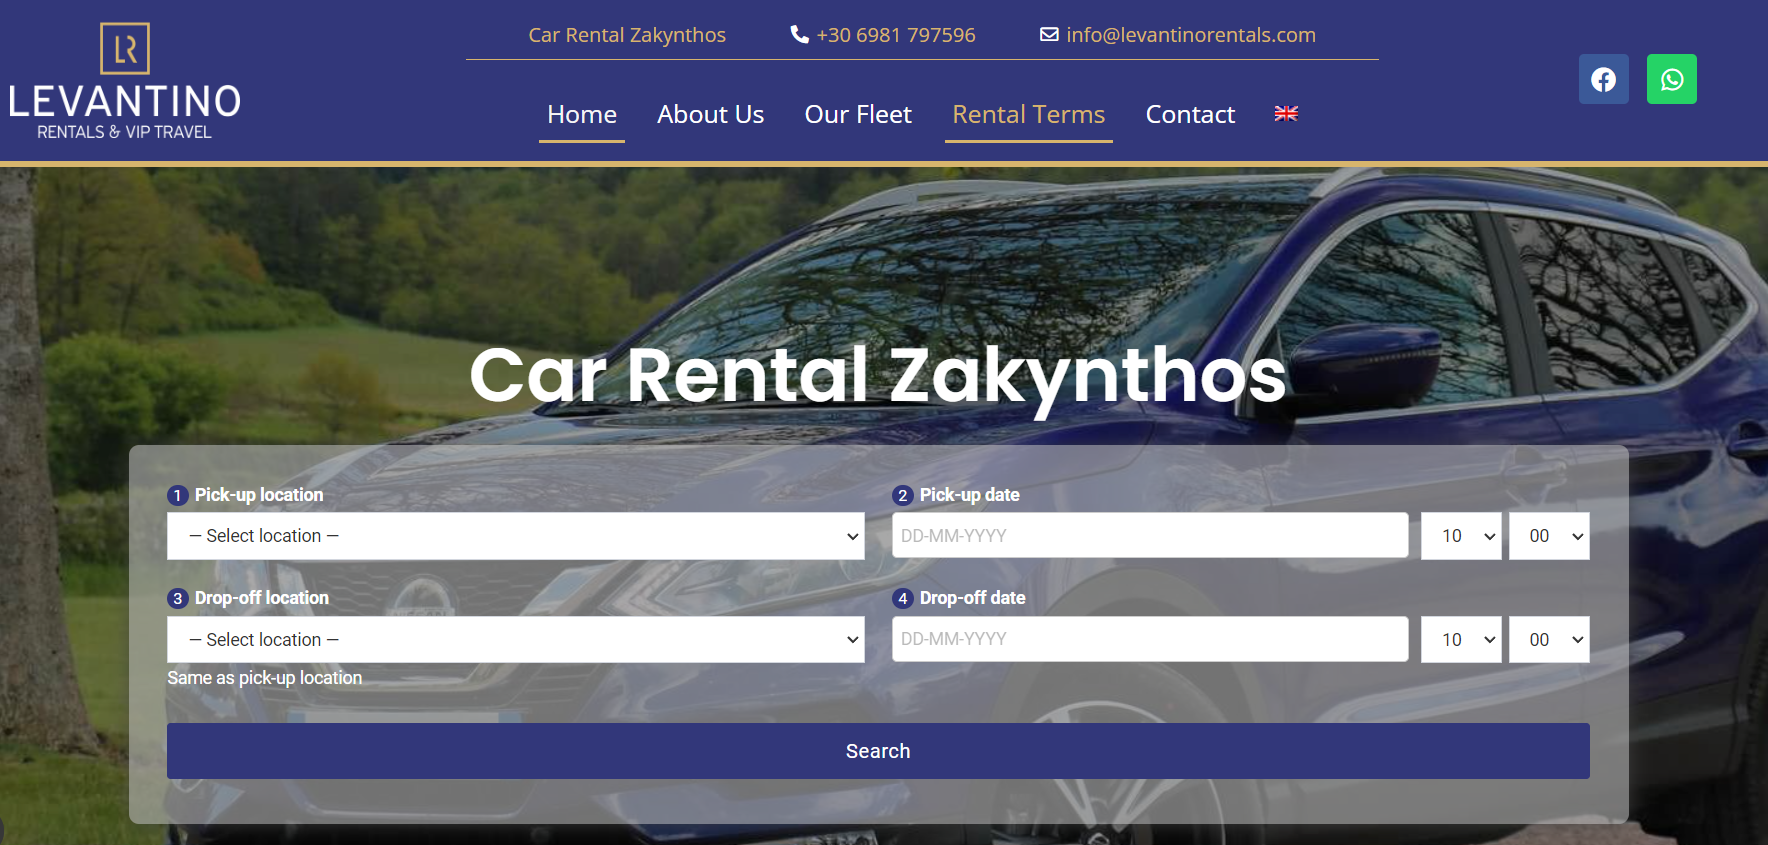 Levantino Rentals - Full Insurance for free Free unlimited kilometers 24hour road assistance Free delivery & collection from airport - hotels - port No deposit needed / No credit card required